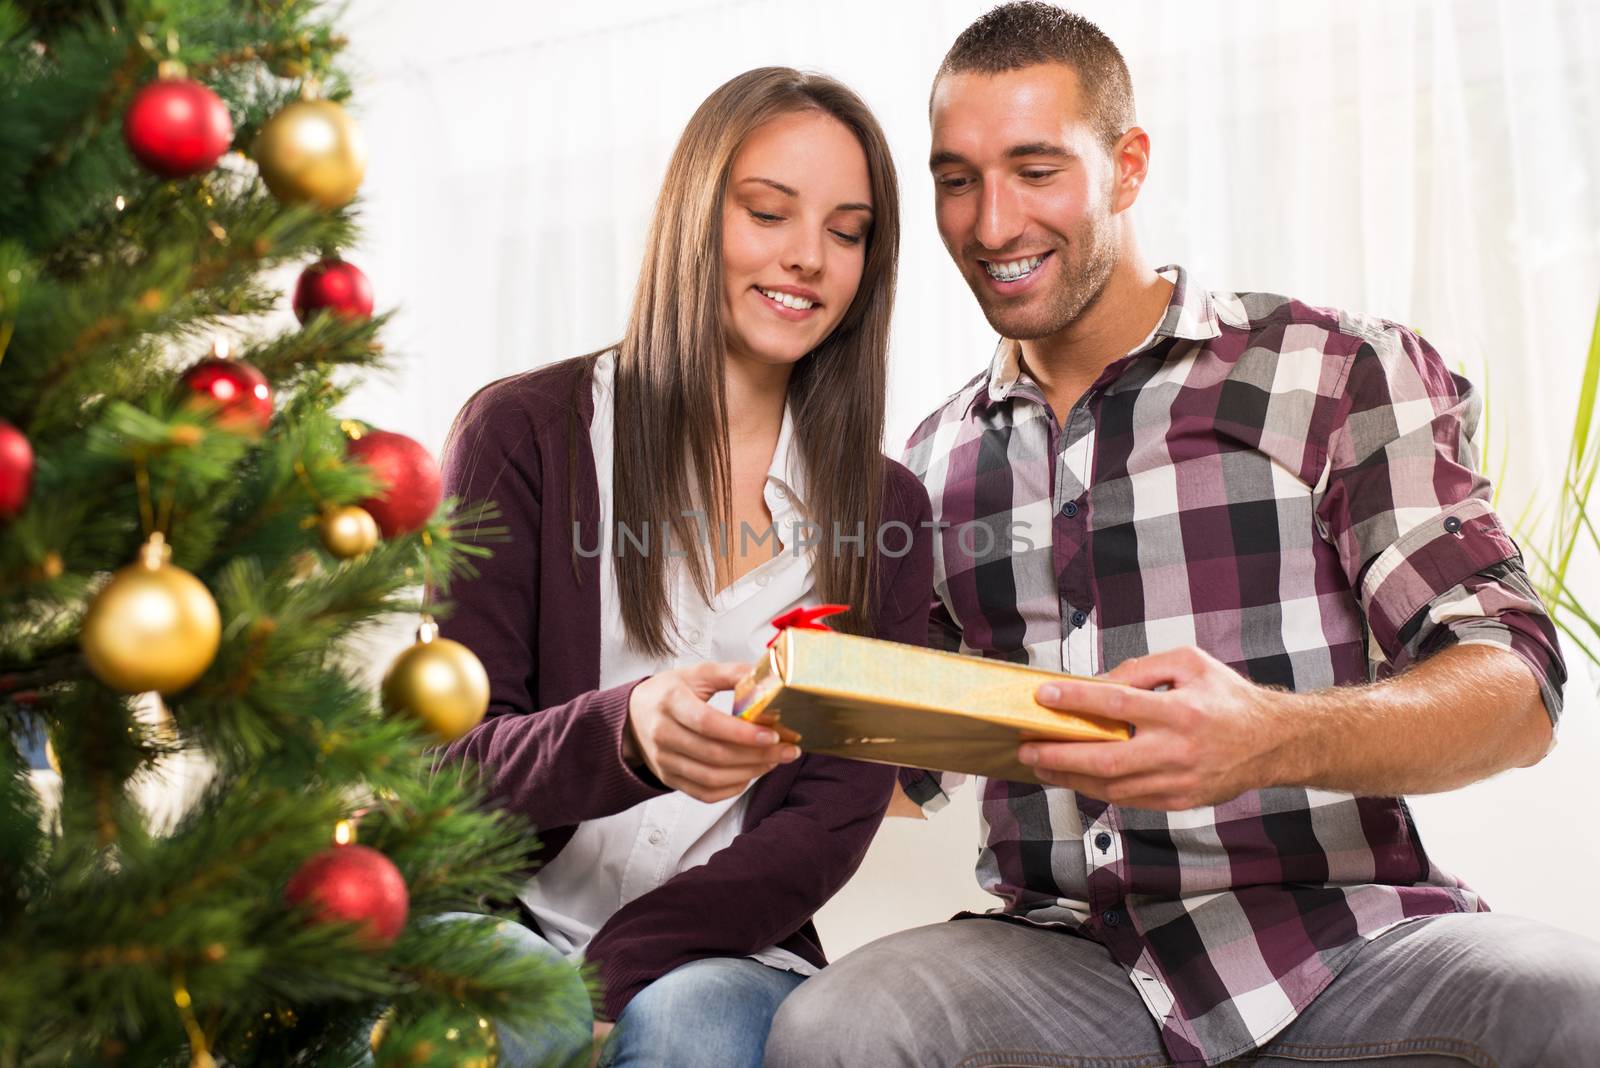 Young man gives his girlfriend a Christmas gift.